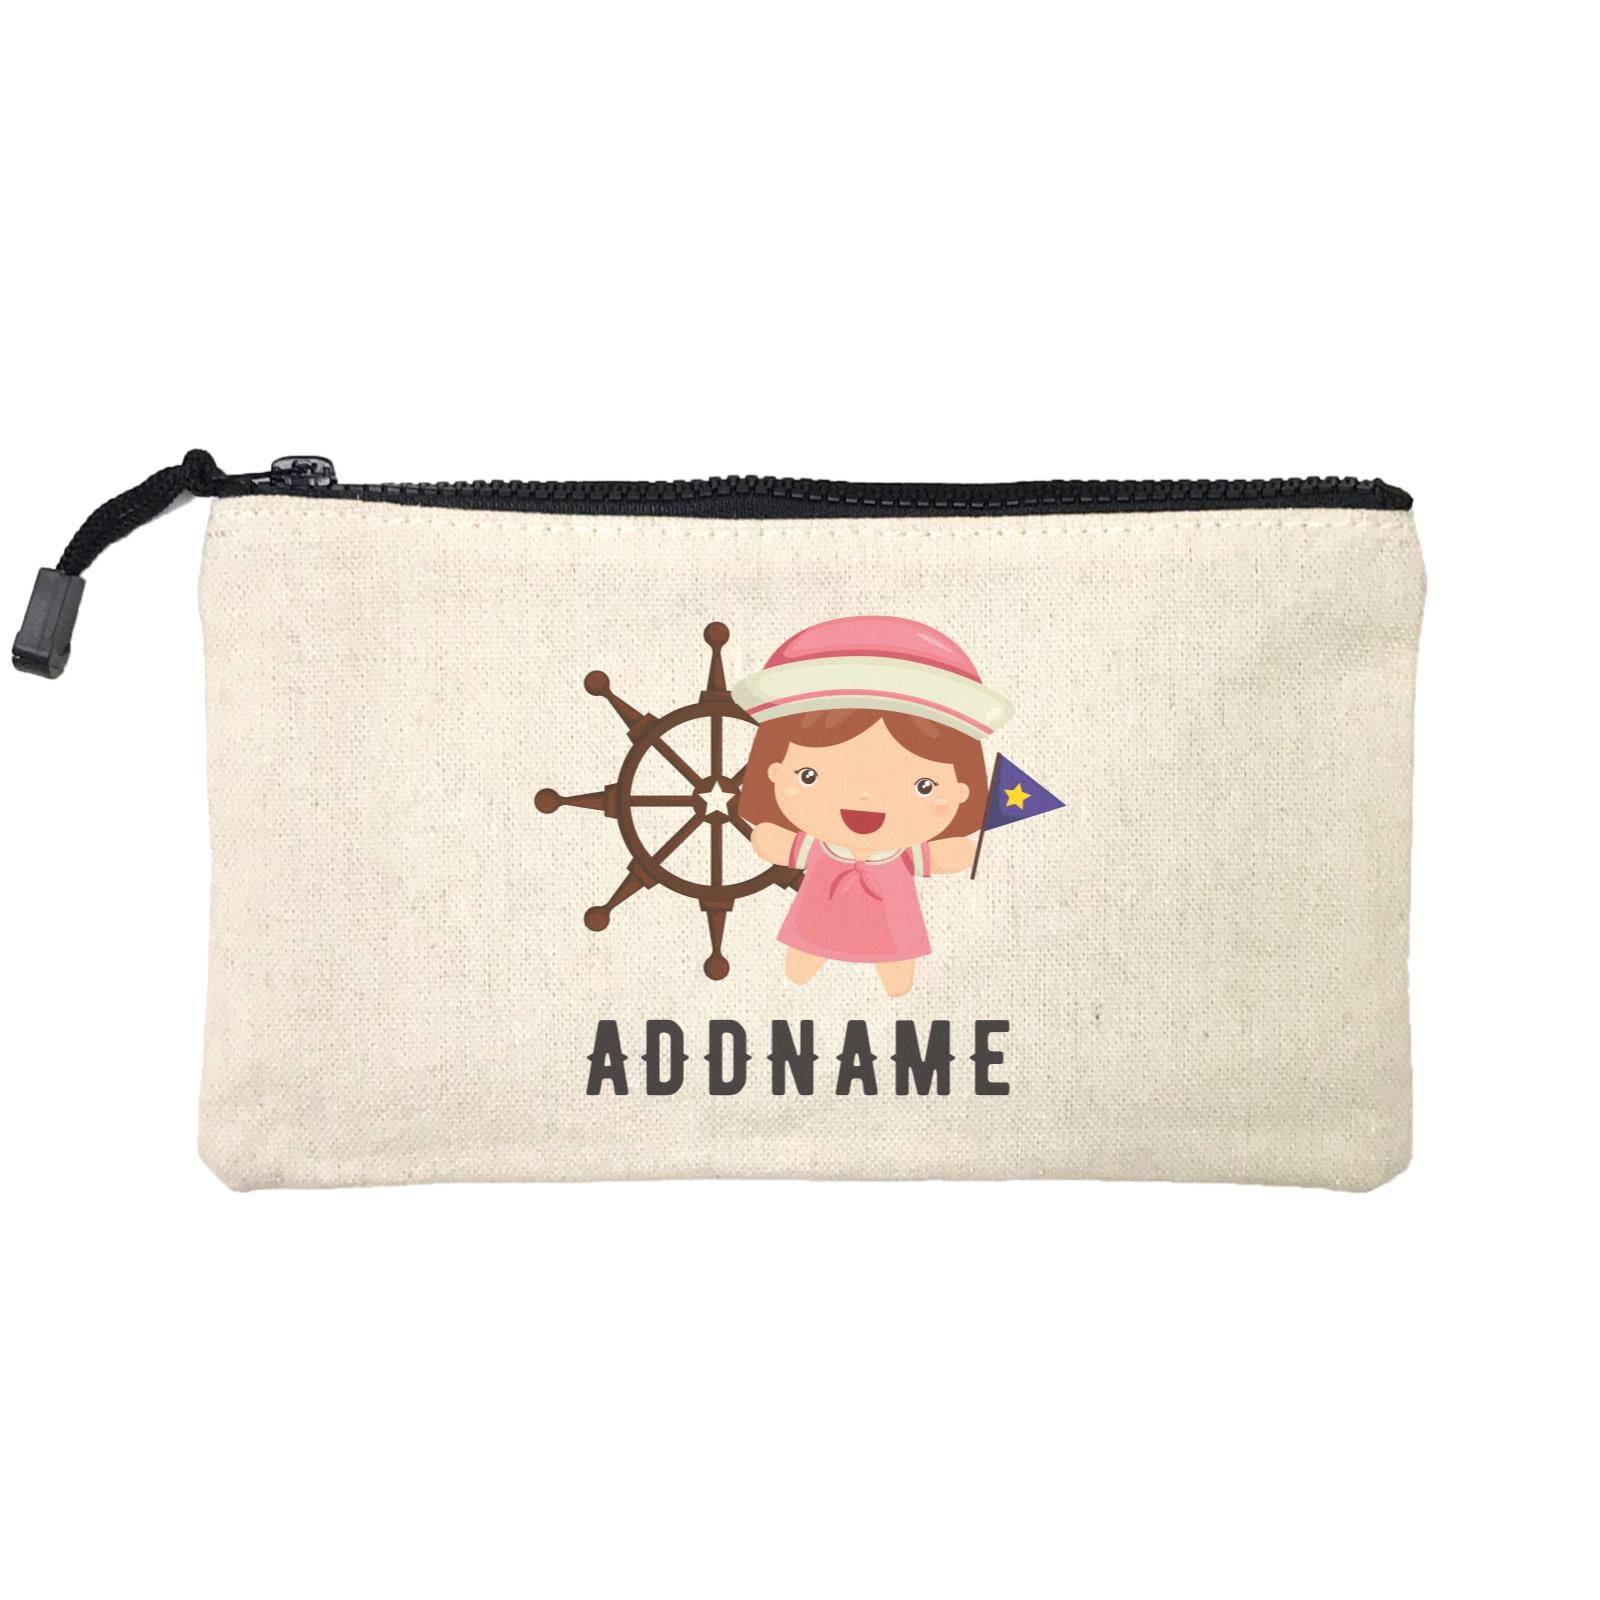 Birthday Sailor Girl In Ship With Wheel Addname Mini Accessories Stationery Pouch